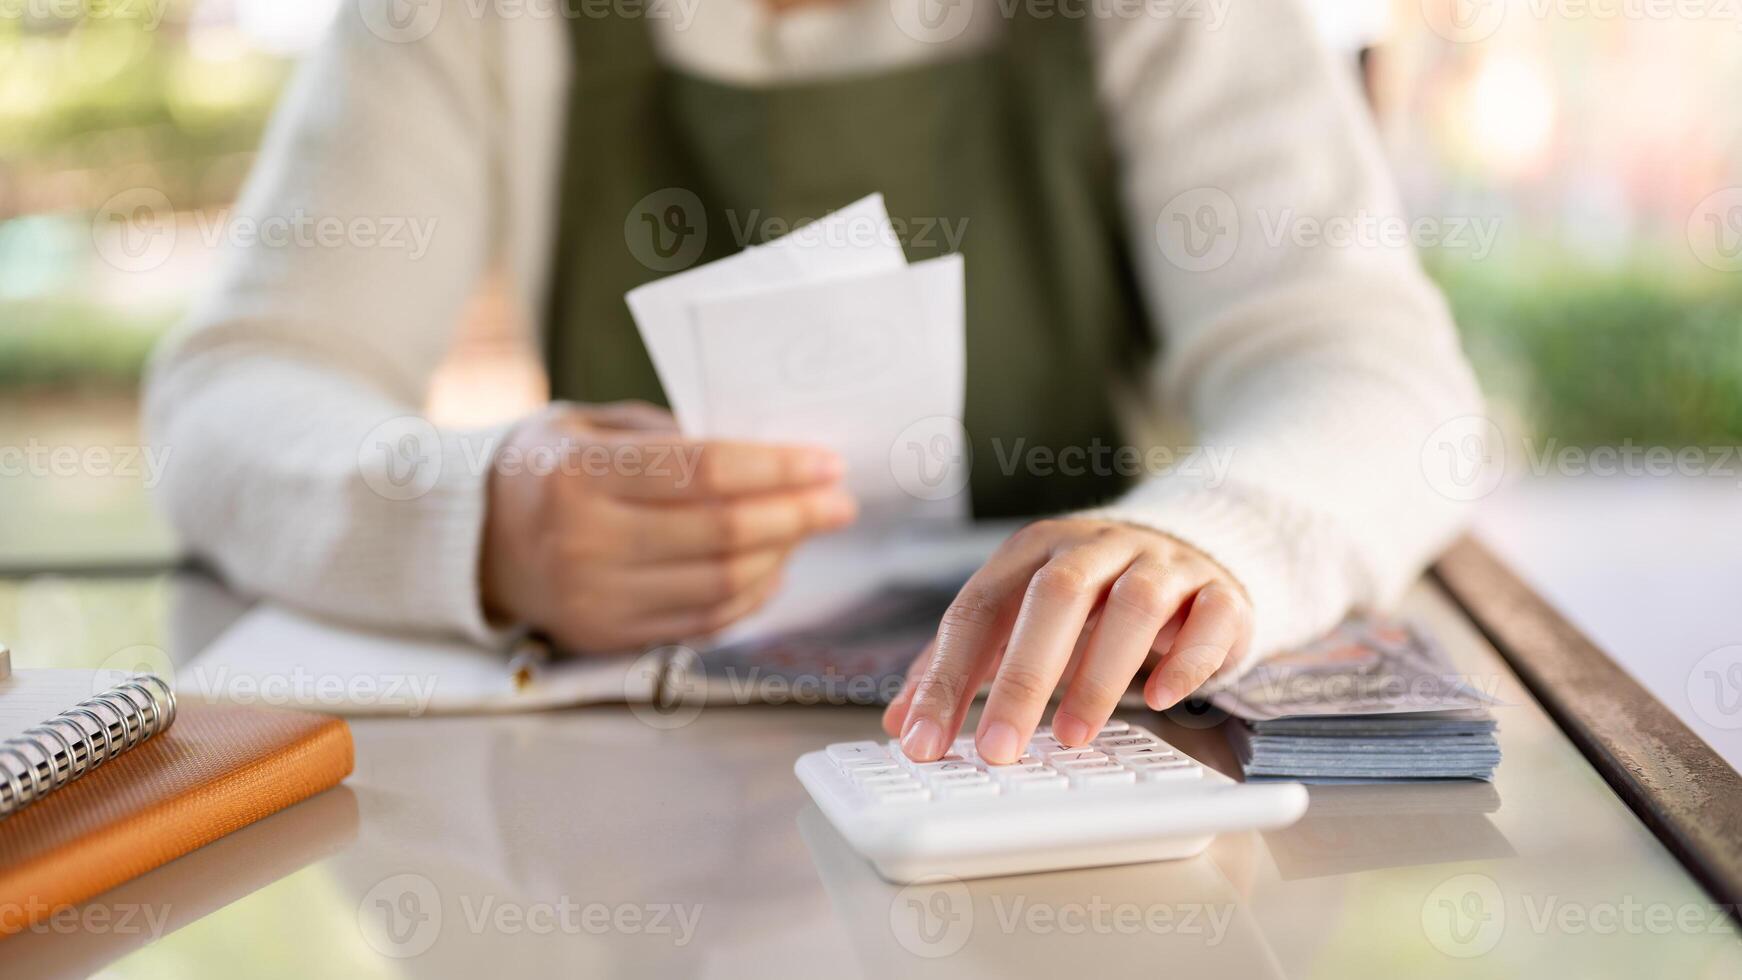 A female small business owner using a calculator, calculating bills, planning her shop expenses. photo